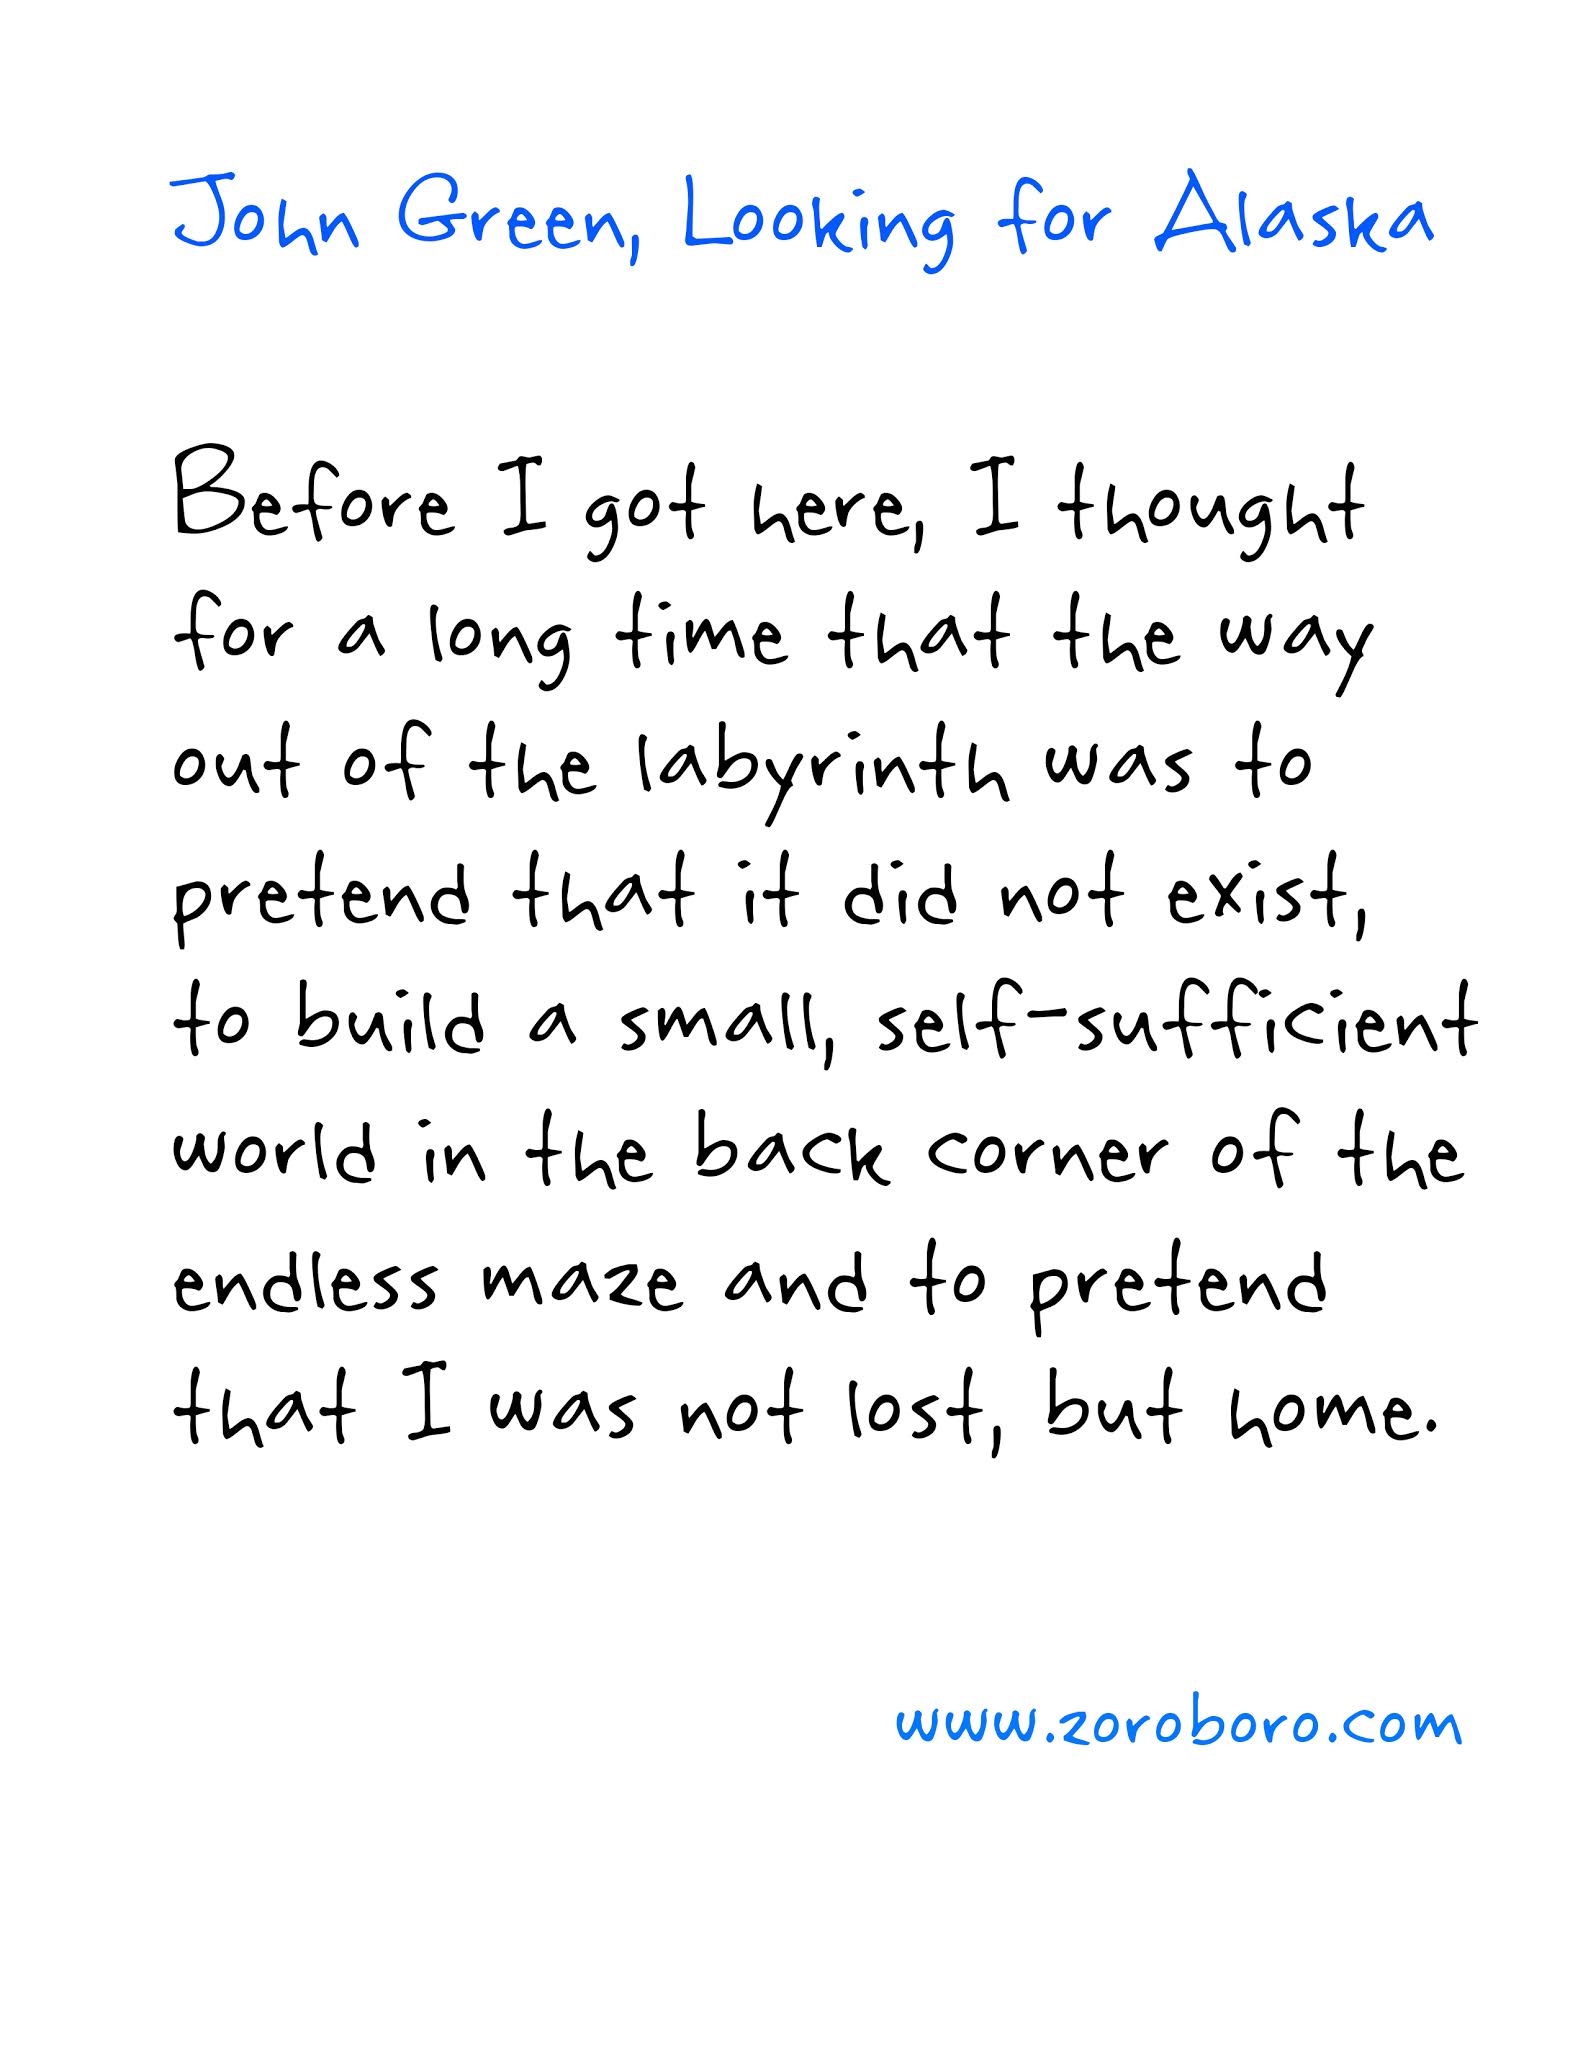 John Green Quotes. The Fault in Our Stars, John Green Looking for Alaska Quotes, Life & John Green Books Quotes. John Green Inspiring Quotes